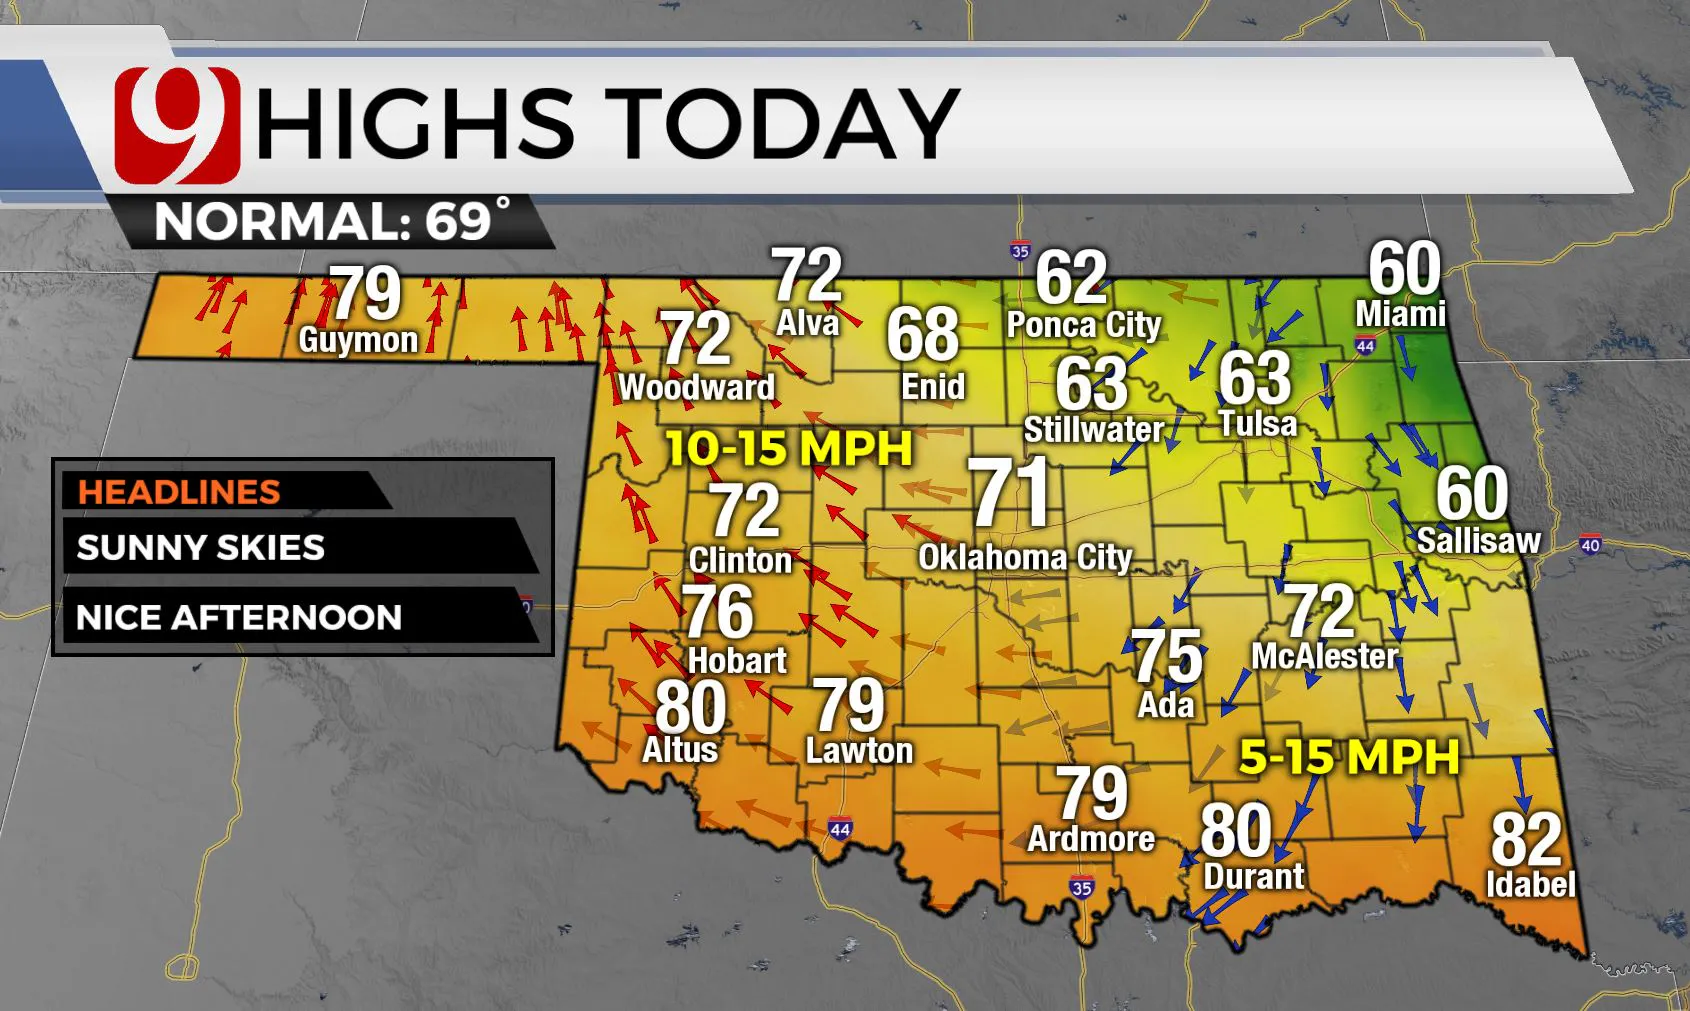 HIGHS TODAY